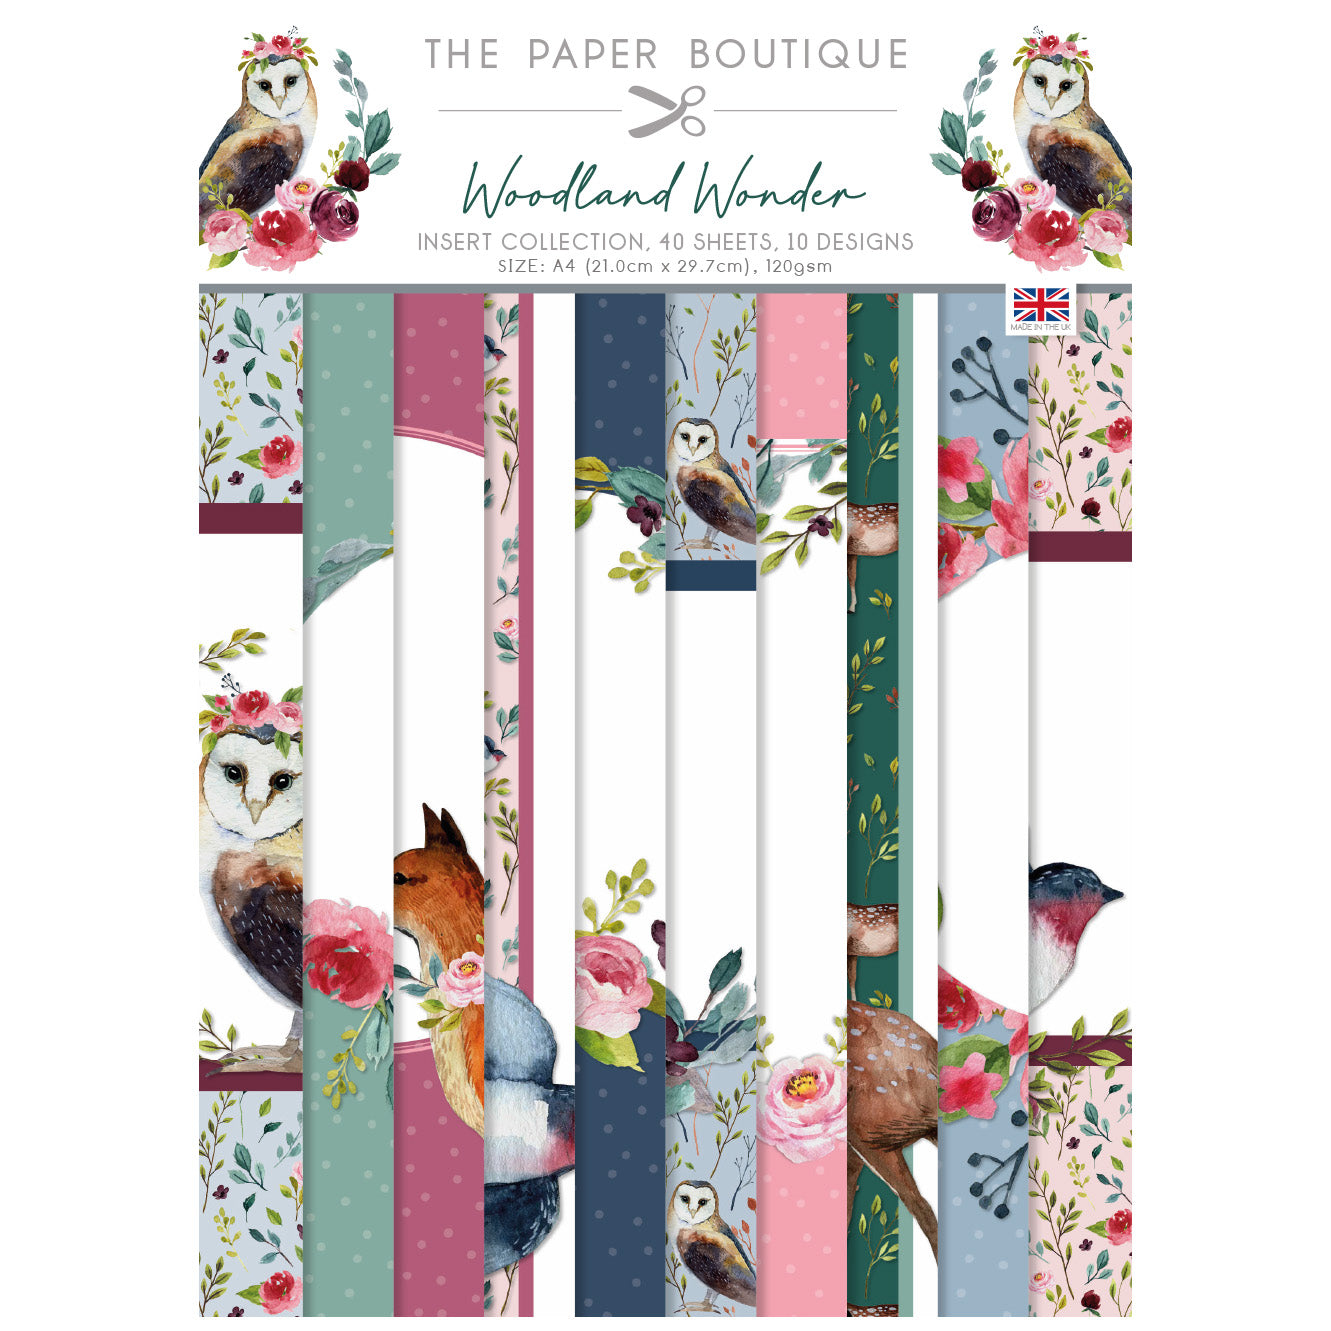 The Paper Boutique Woodland Wonder Insert Collection